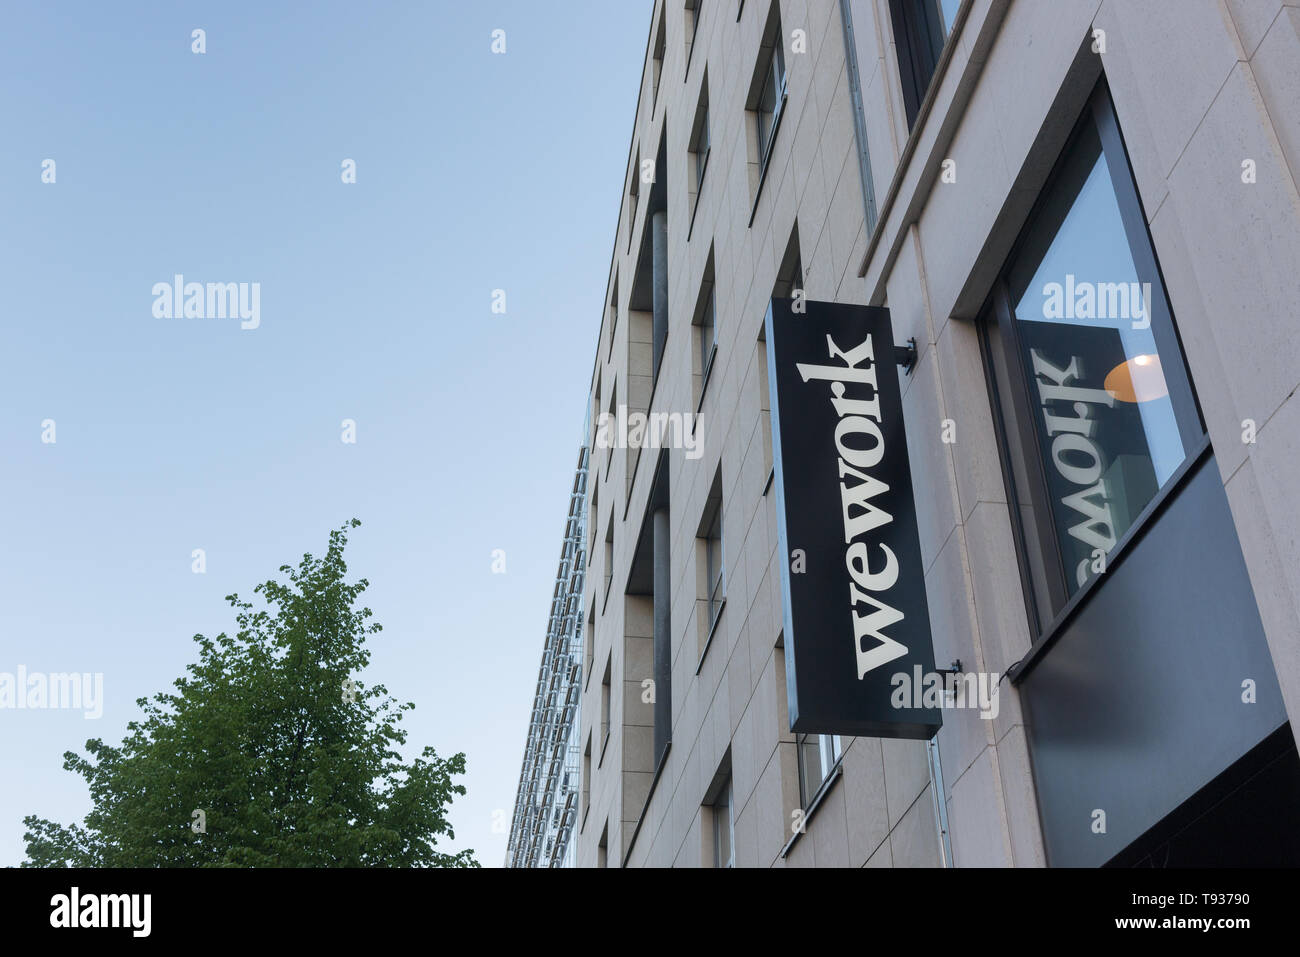 Berlin, Germany - April 29, 2019: A location of the co-working and office space company WeWork in Berlin Germany Stock Photo